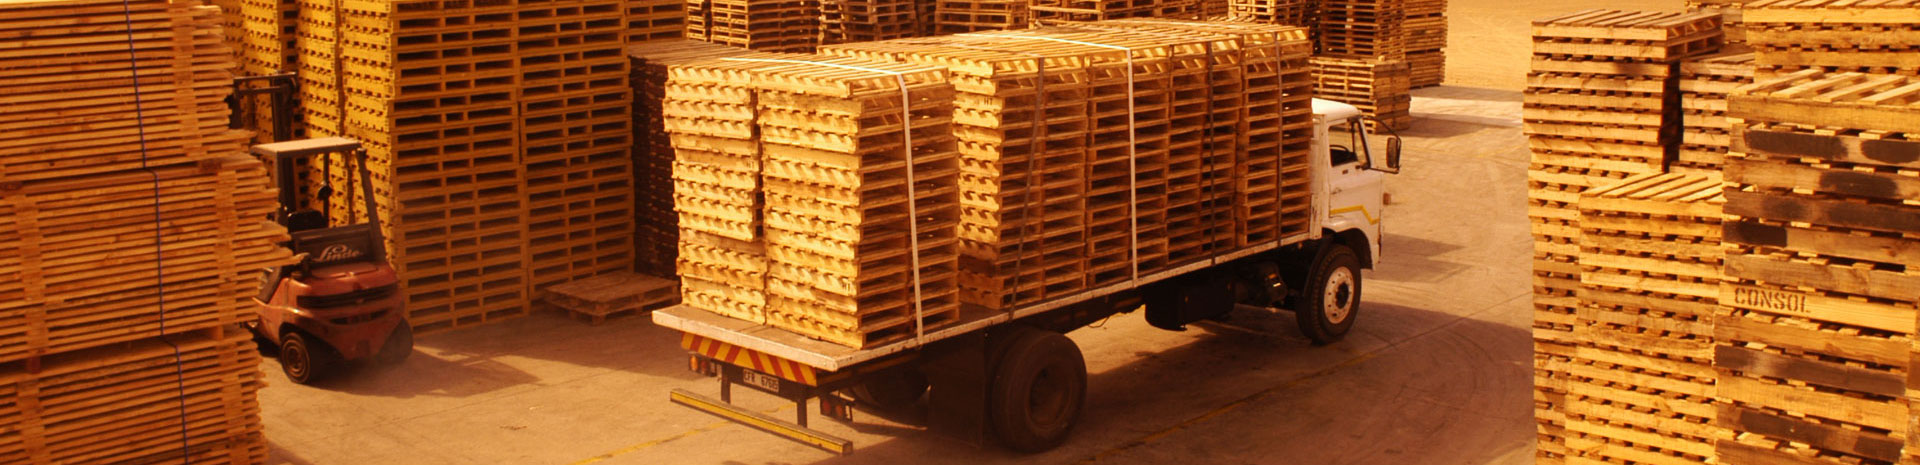 Pallet Supply Company Pallet Delivery